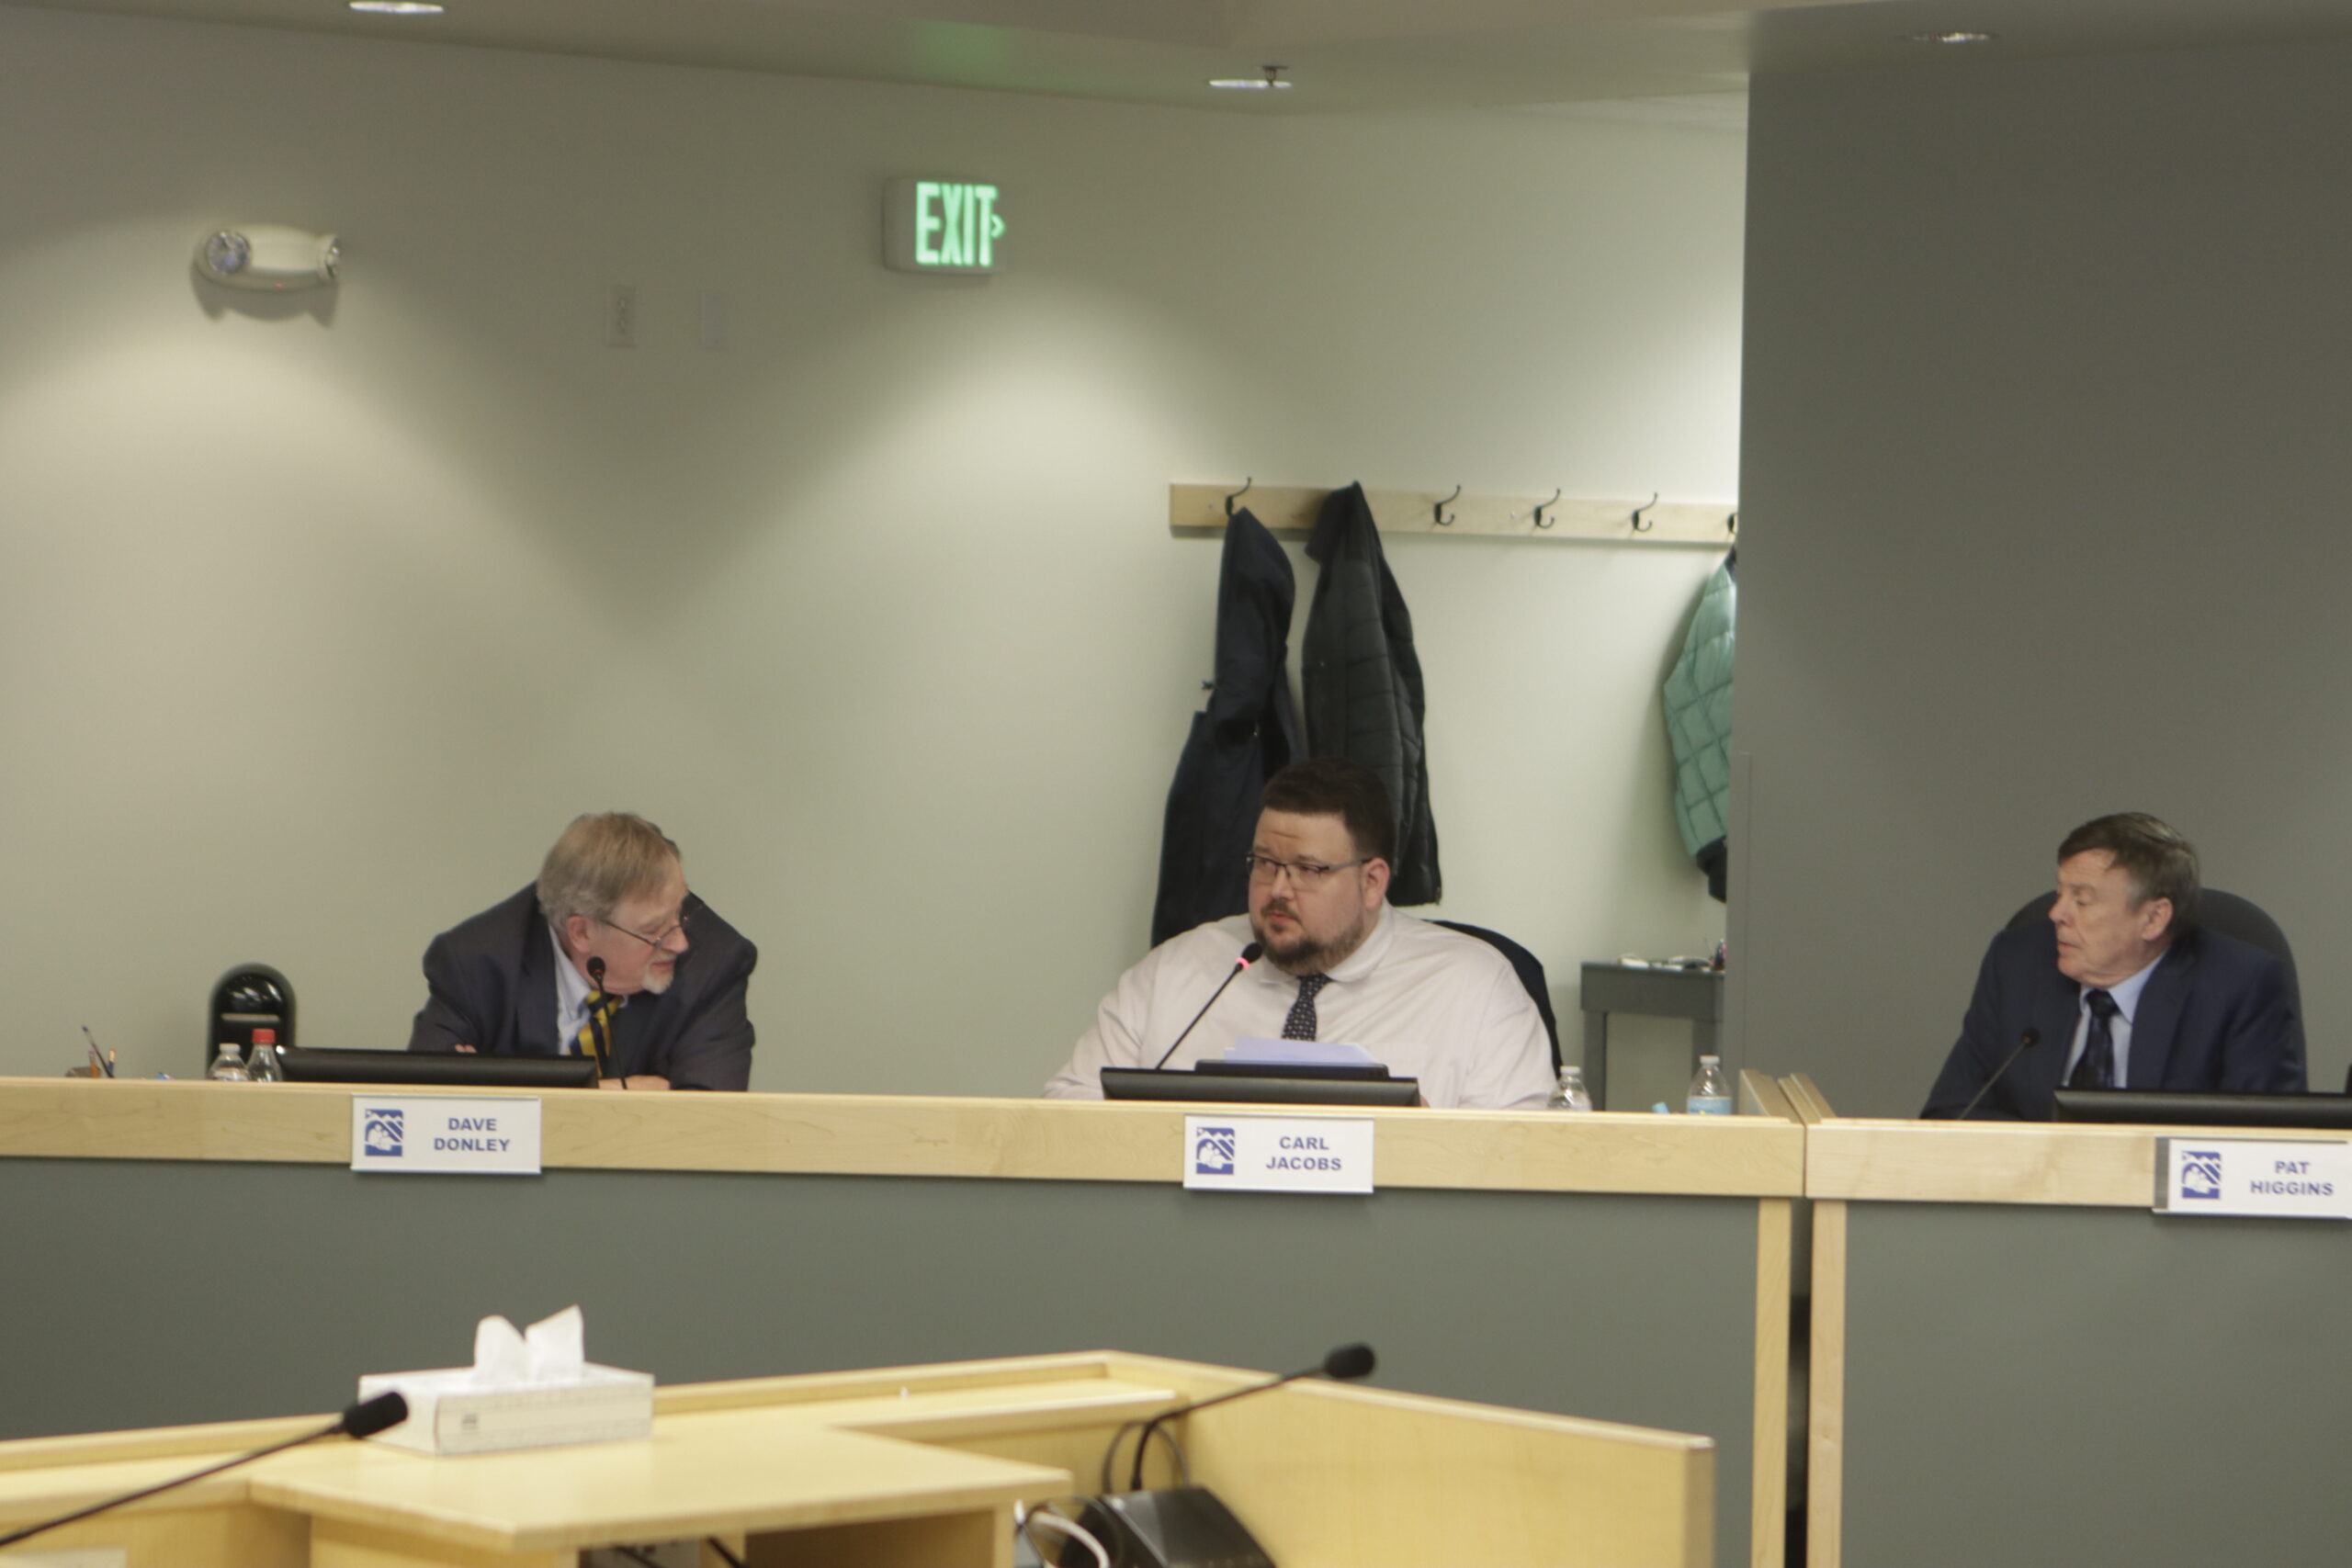 Anchorage School Board members Dave Donley, Carl Jacobs and Pat Higgins.